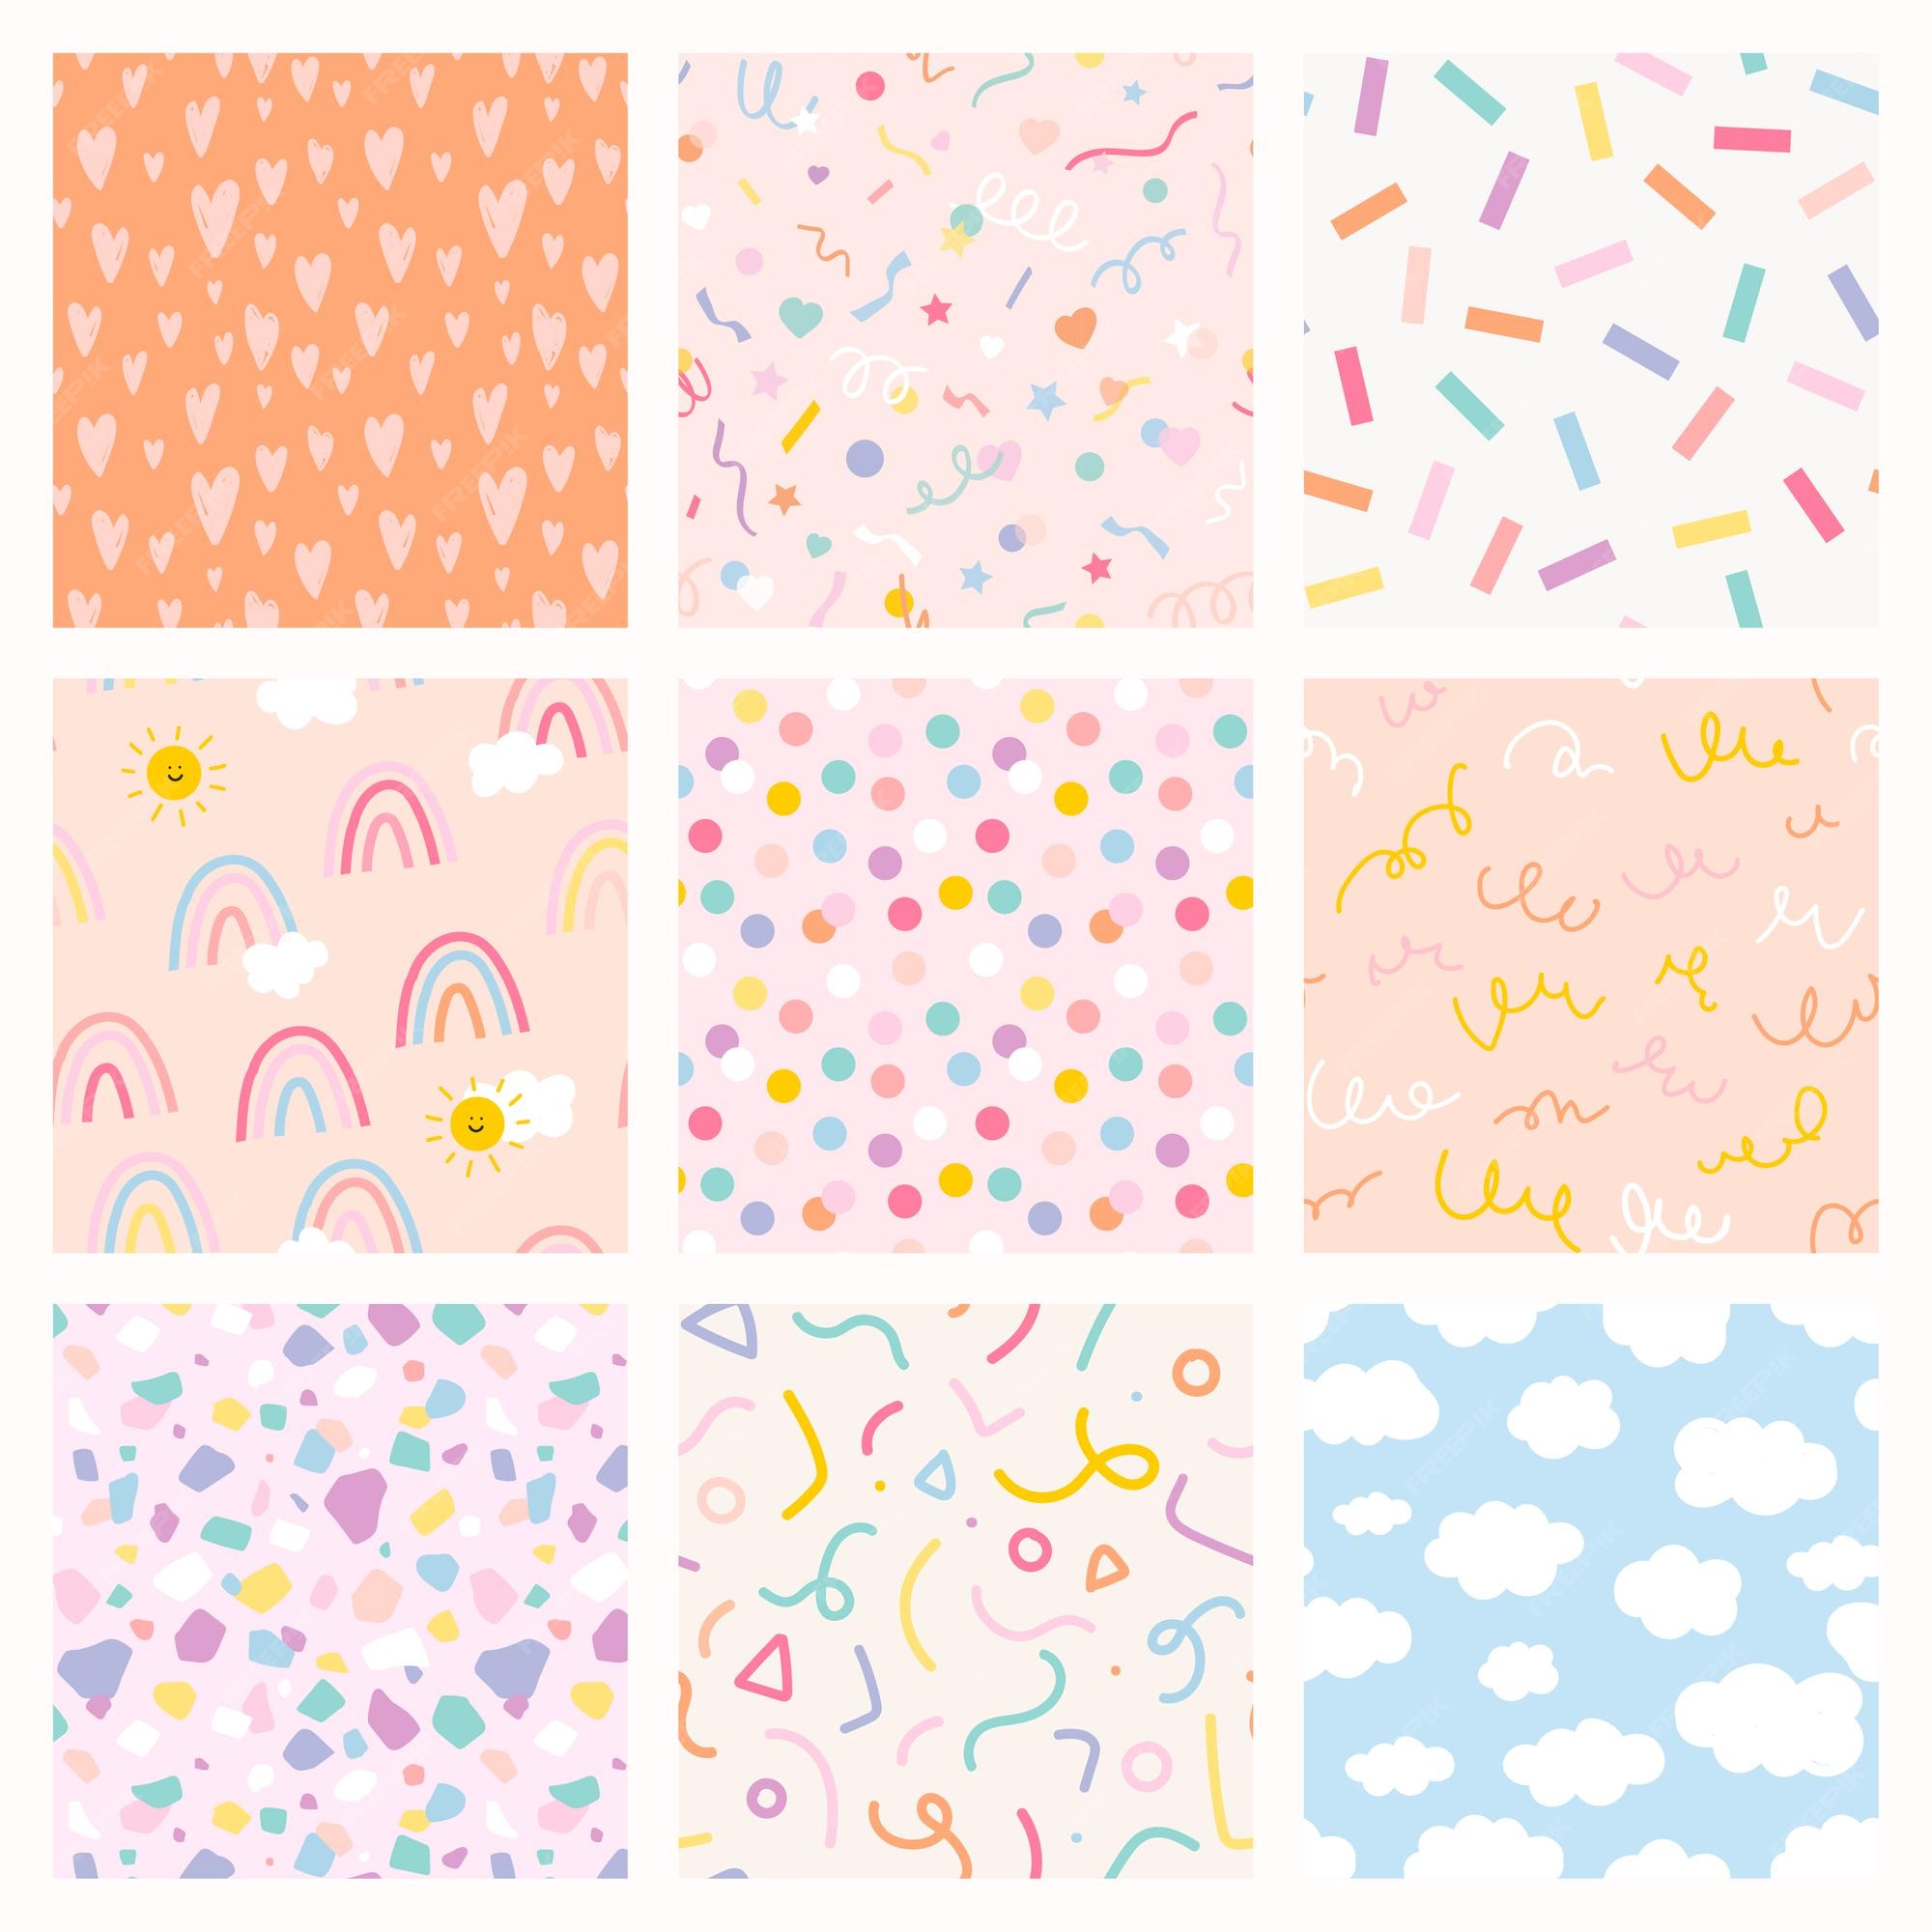 Cute Texture Images - Free Download on Freepik